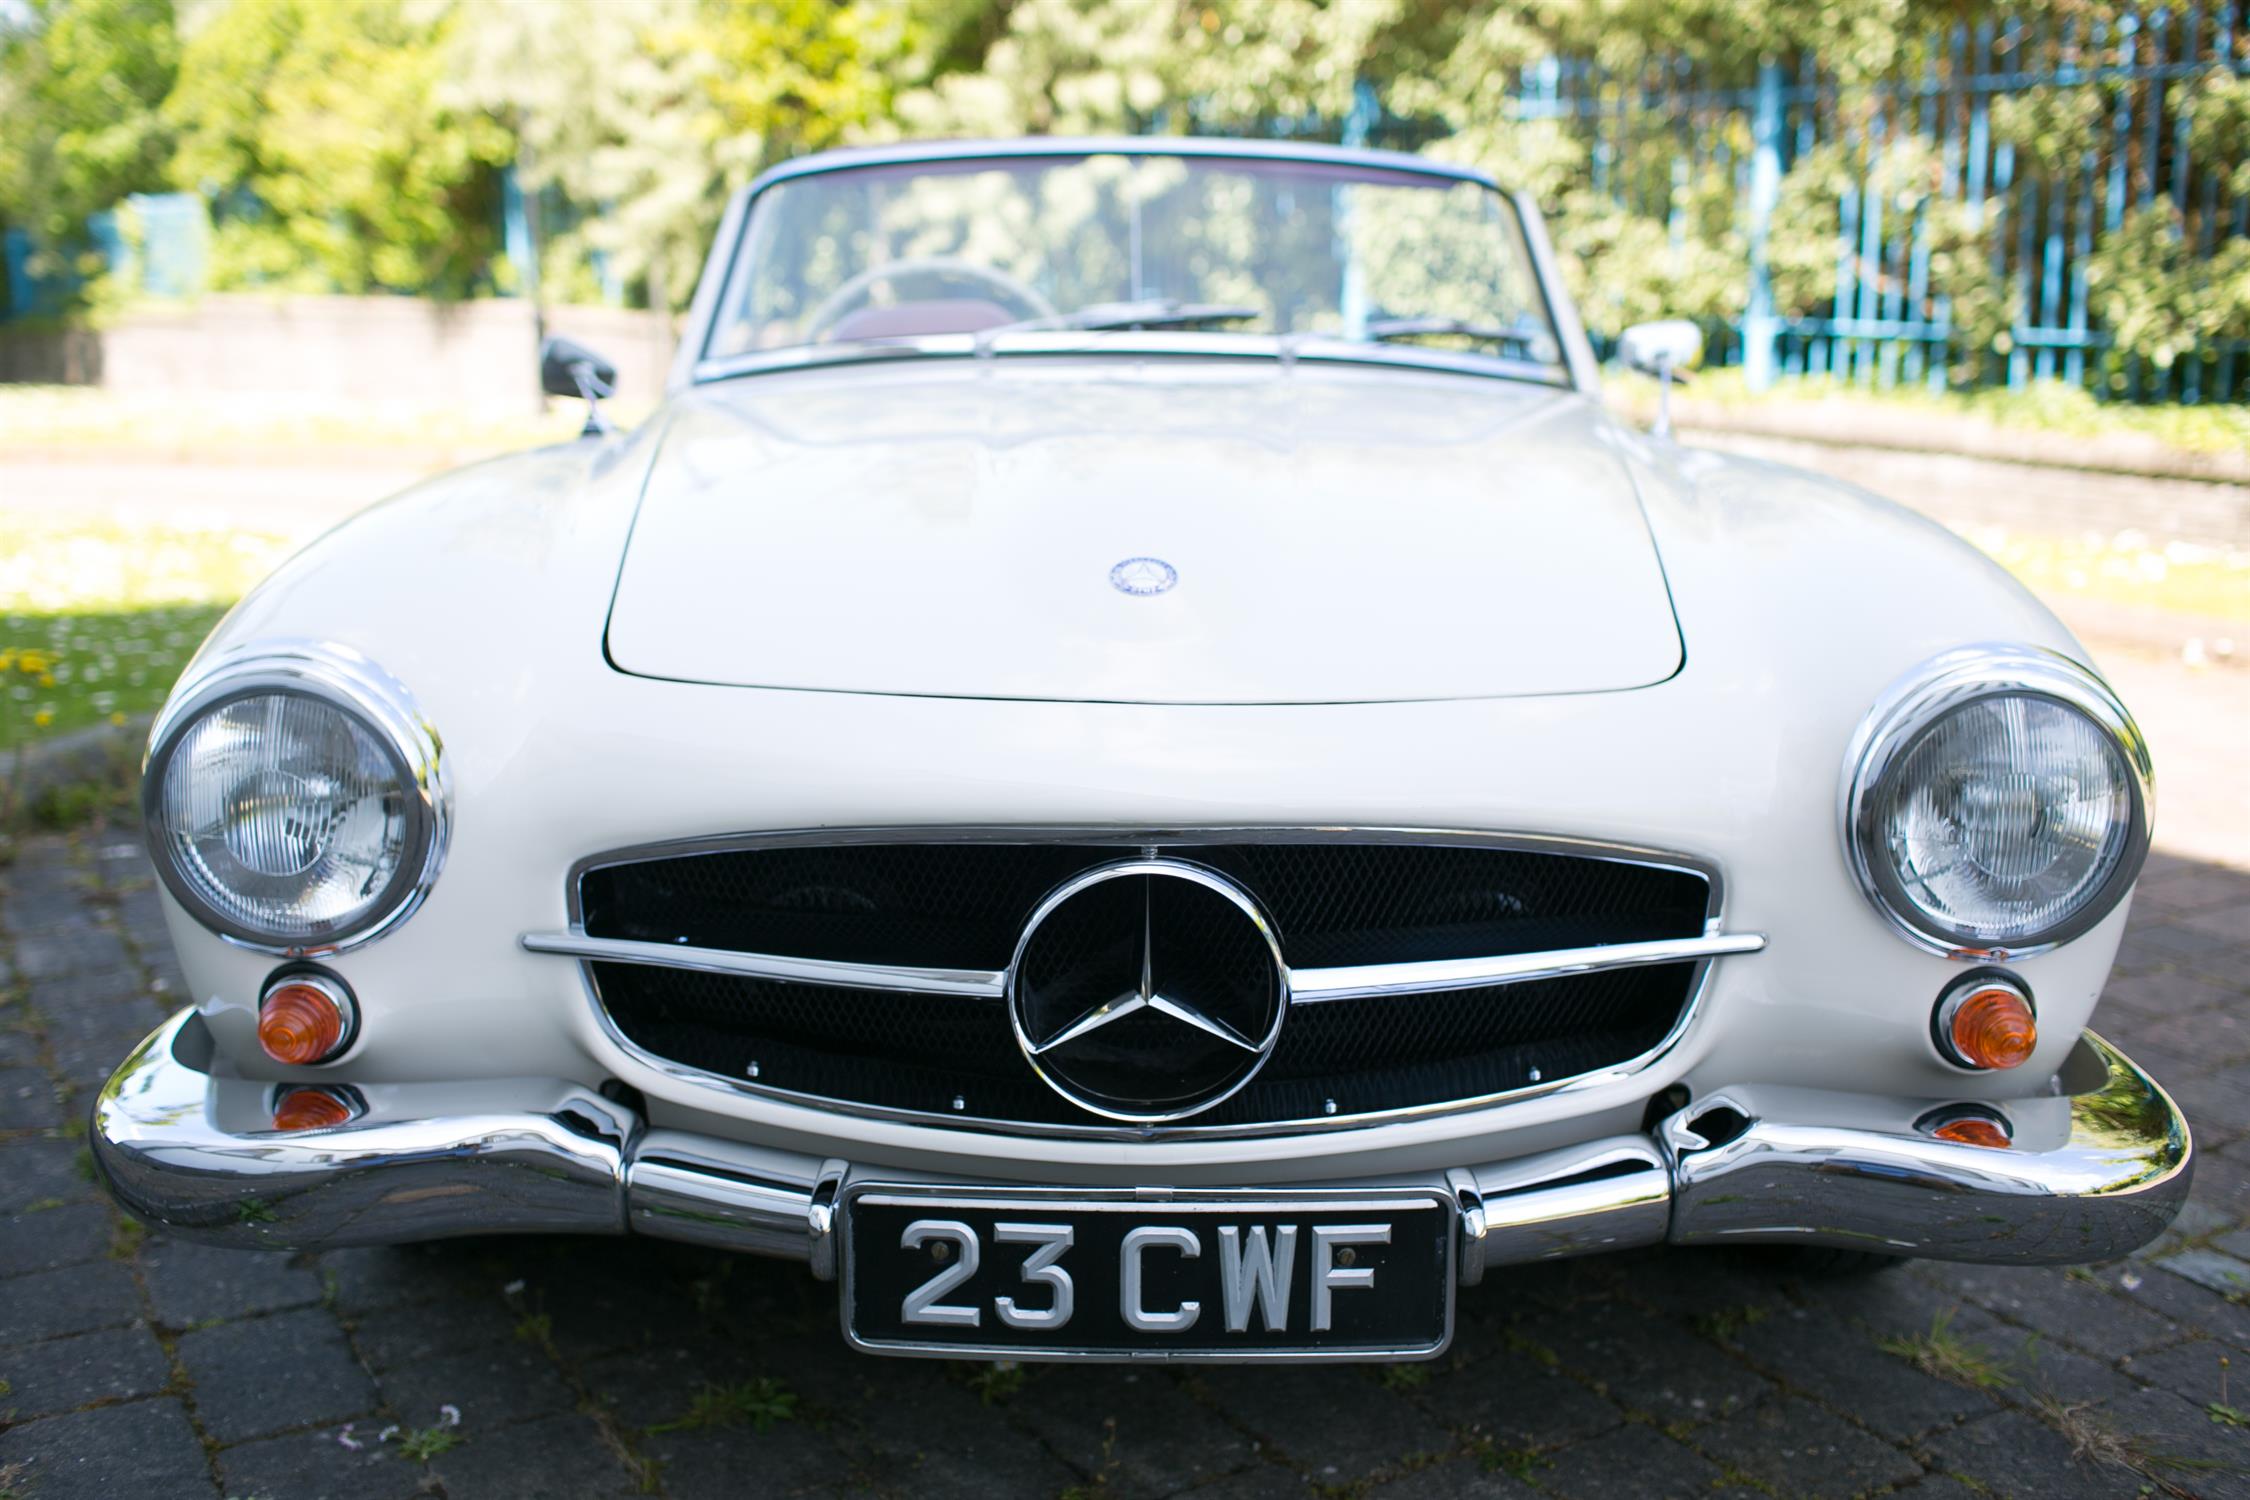 1962 Mercedes-Benz 190 SL with Hardtop - Right-Hand Drive - Image 6 of 19